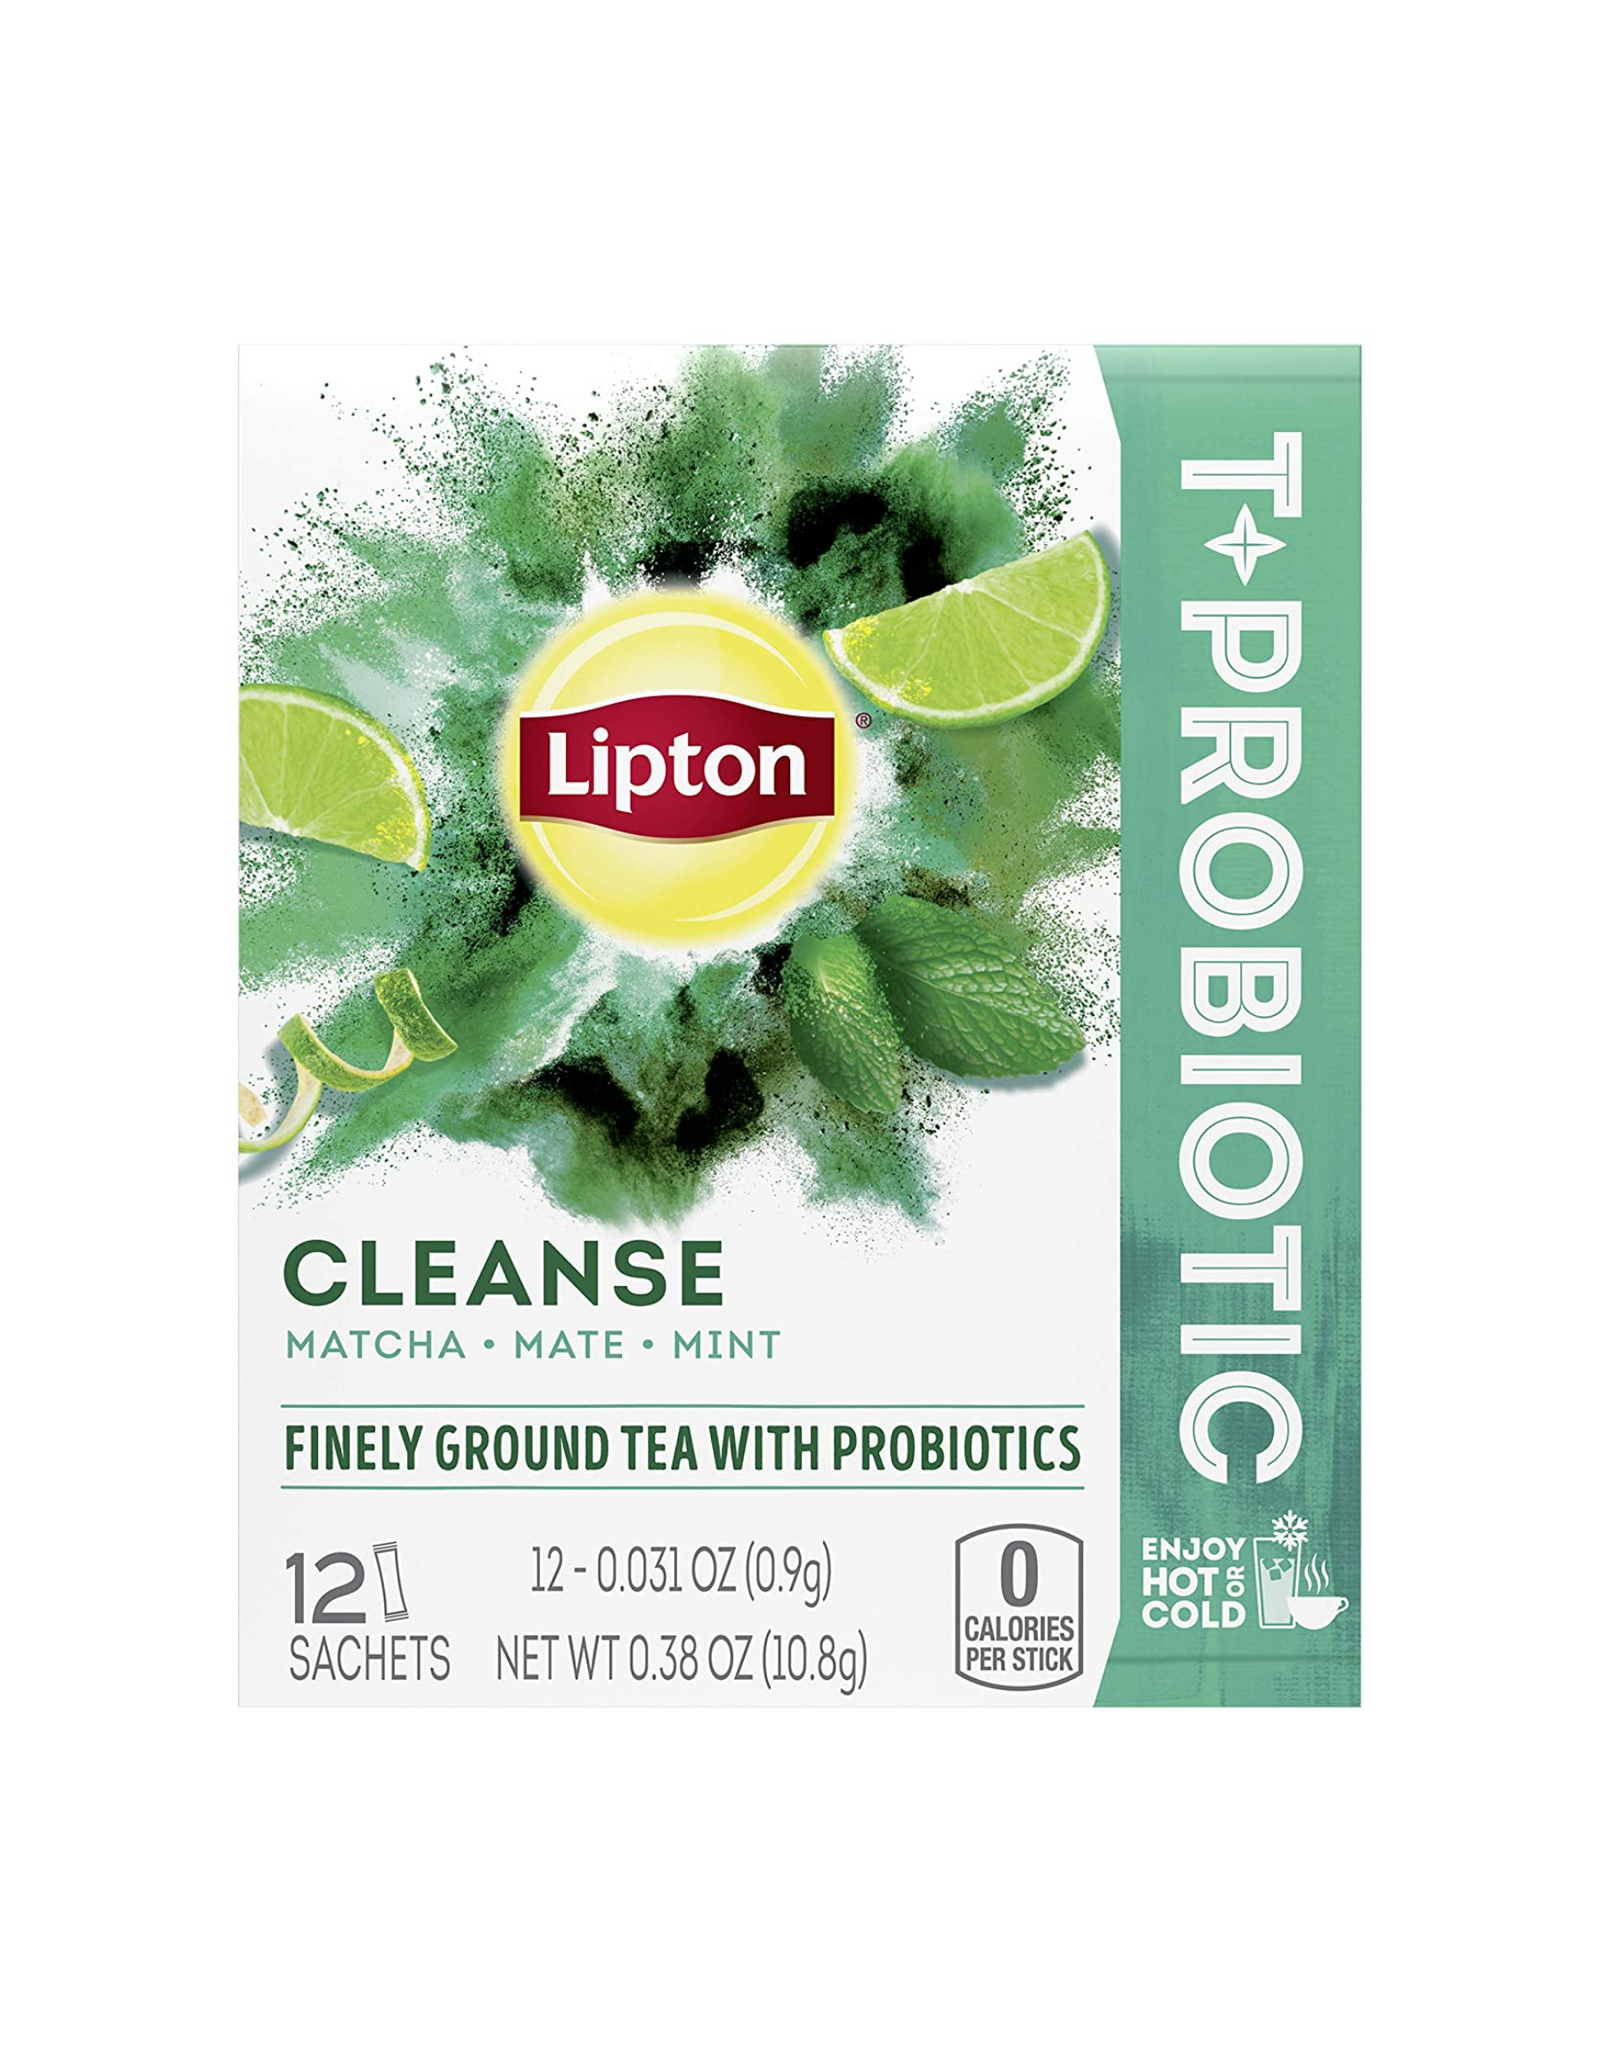 Lipton T+Probiotic Herbal Tea Sachets, Cleanse Tea Powdered with Matcha Mate Mint, 0.38 oz, 12 Ct (Pack of 9)